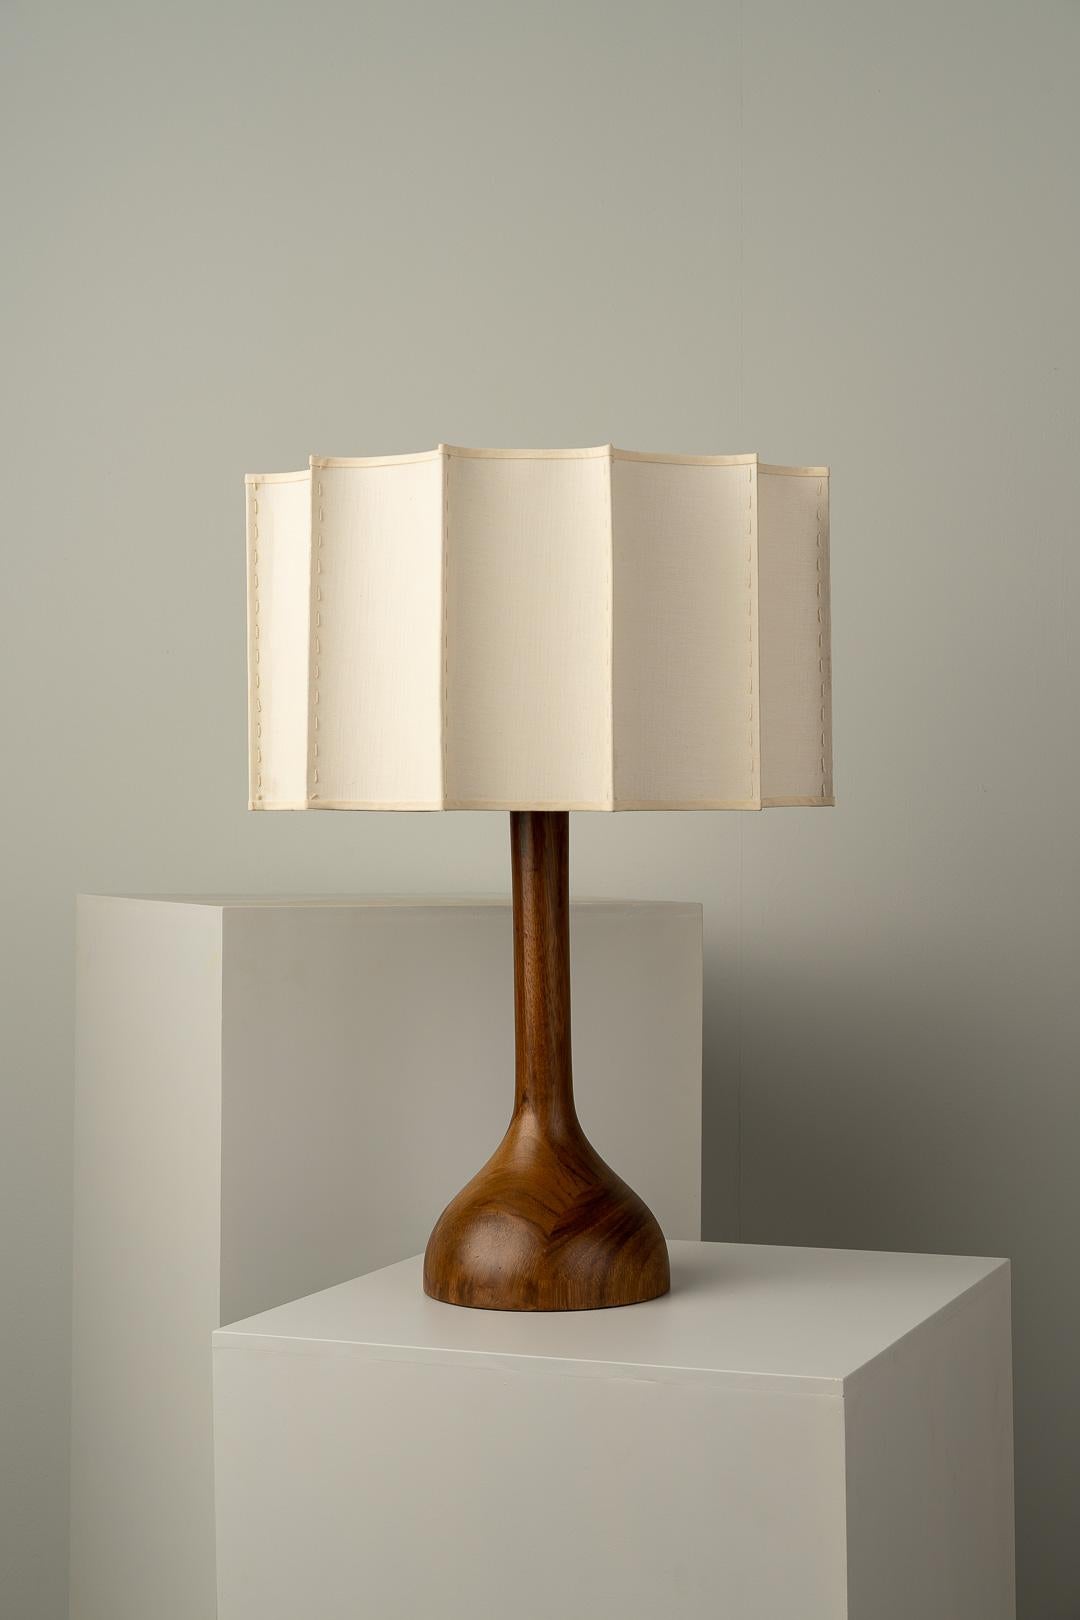 PATA DE ELEFANTE SMALL table lamp was designed for the Atomic collection by Mexican artist Isabel Moncada.

Named Pata de Elefante –Elephant's Foot– for the prominent shape at its base. Separated by a long stem is its ornamental, wavy and handmade